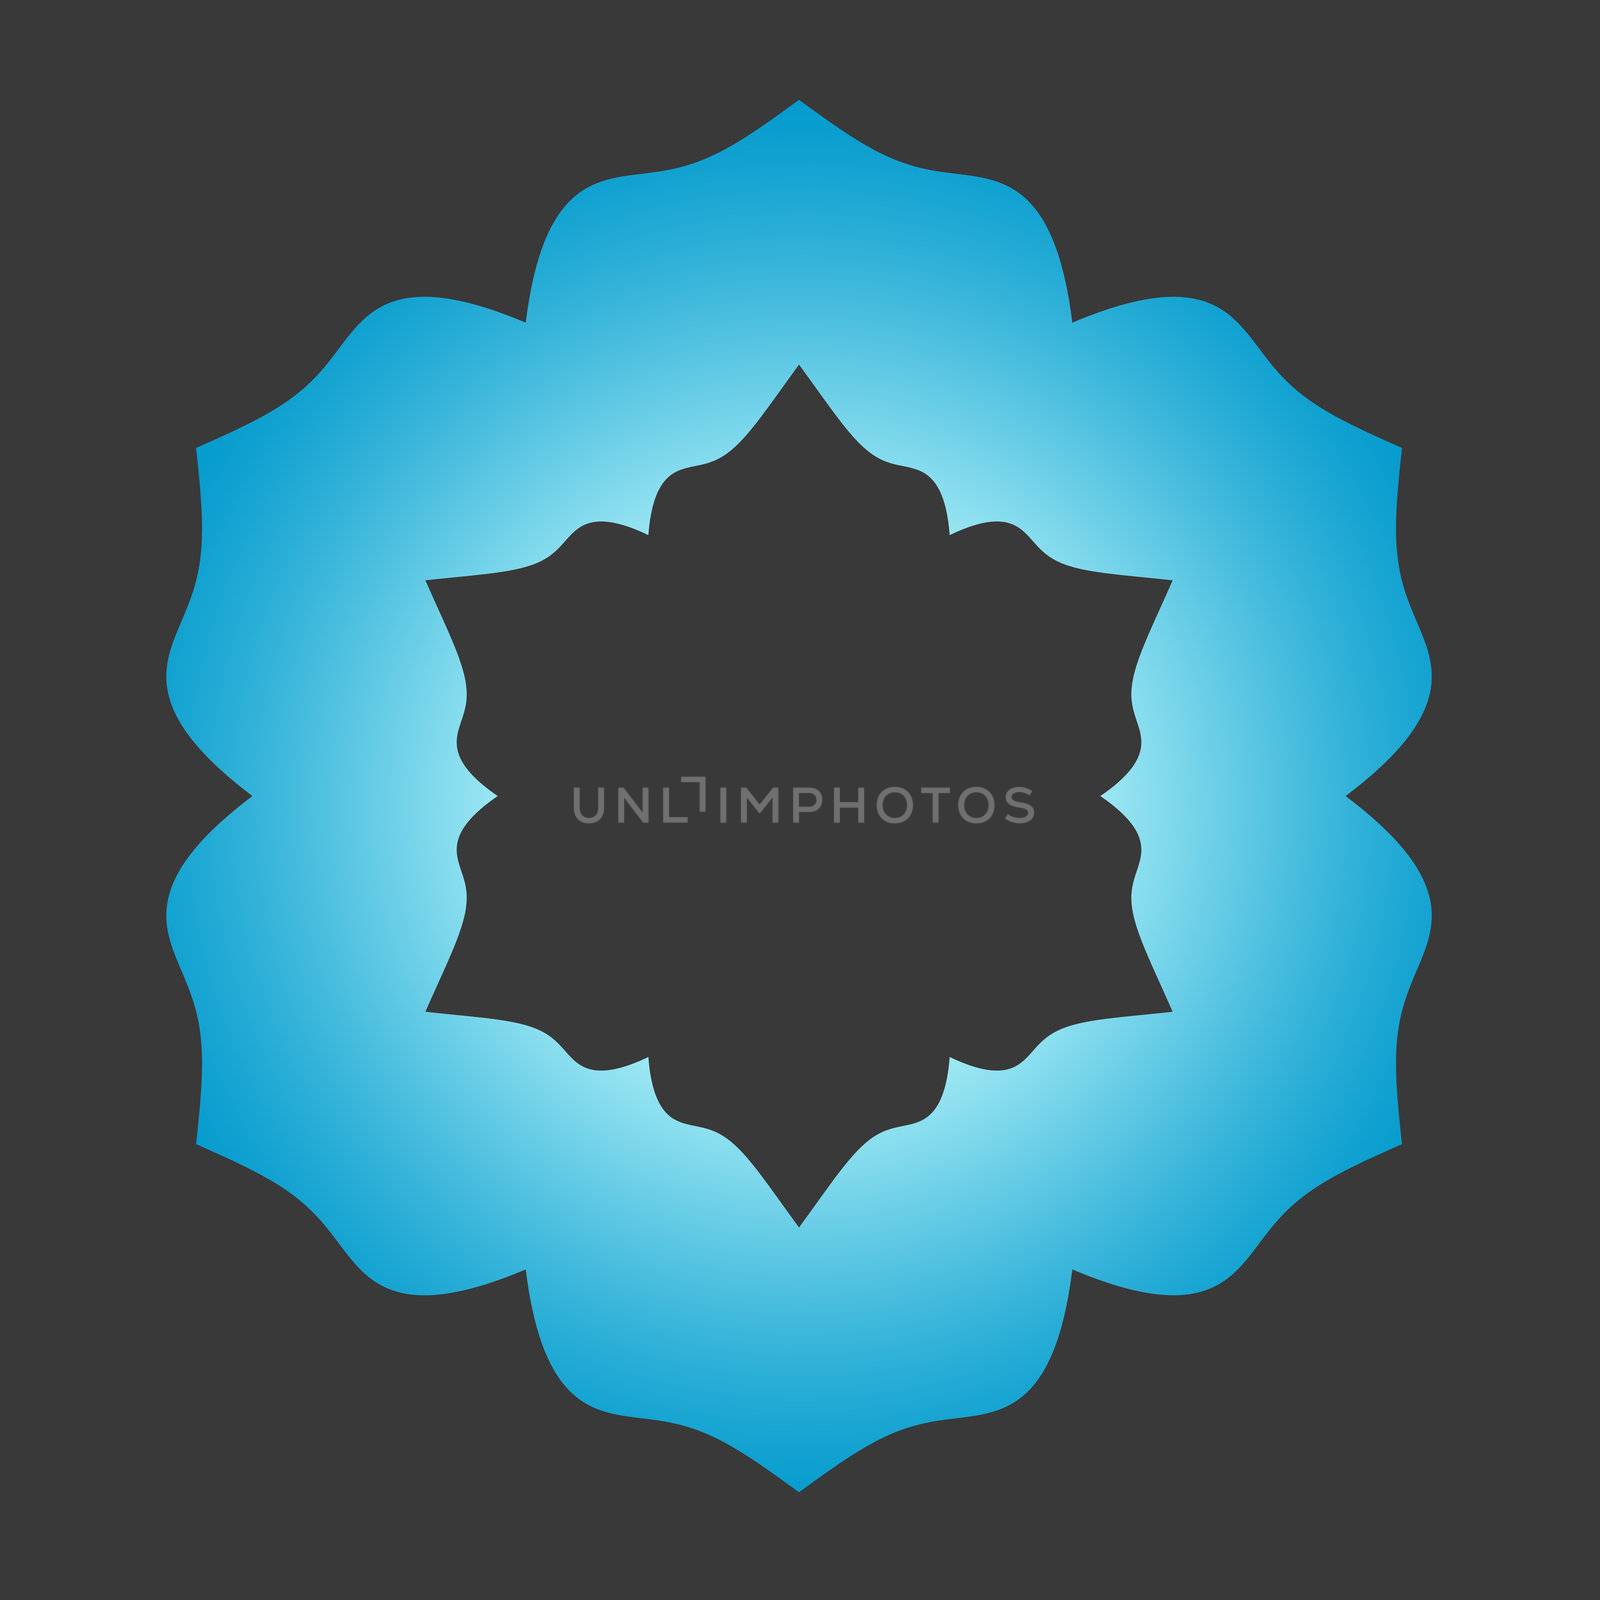 An abstract illustrated logo in shades of blue on a gray background.